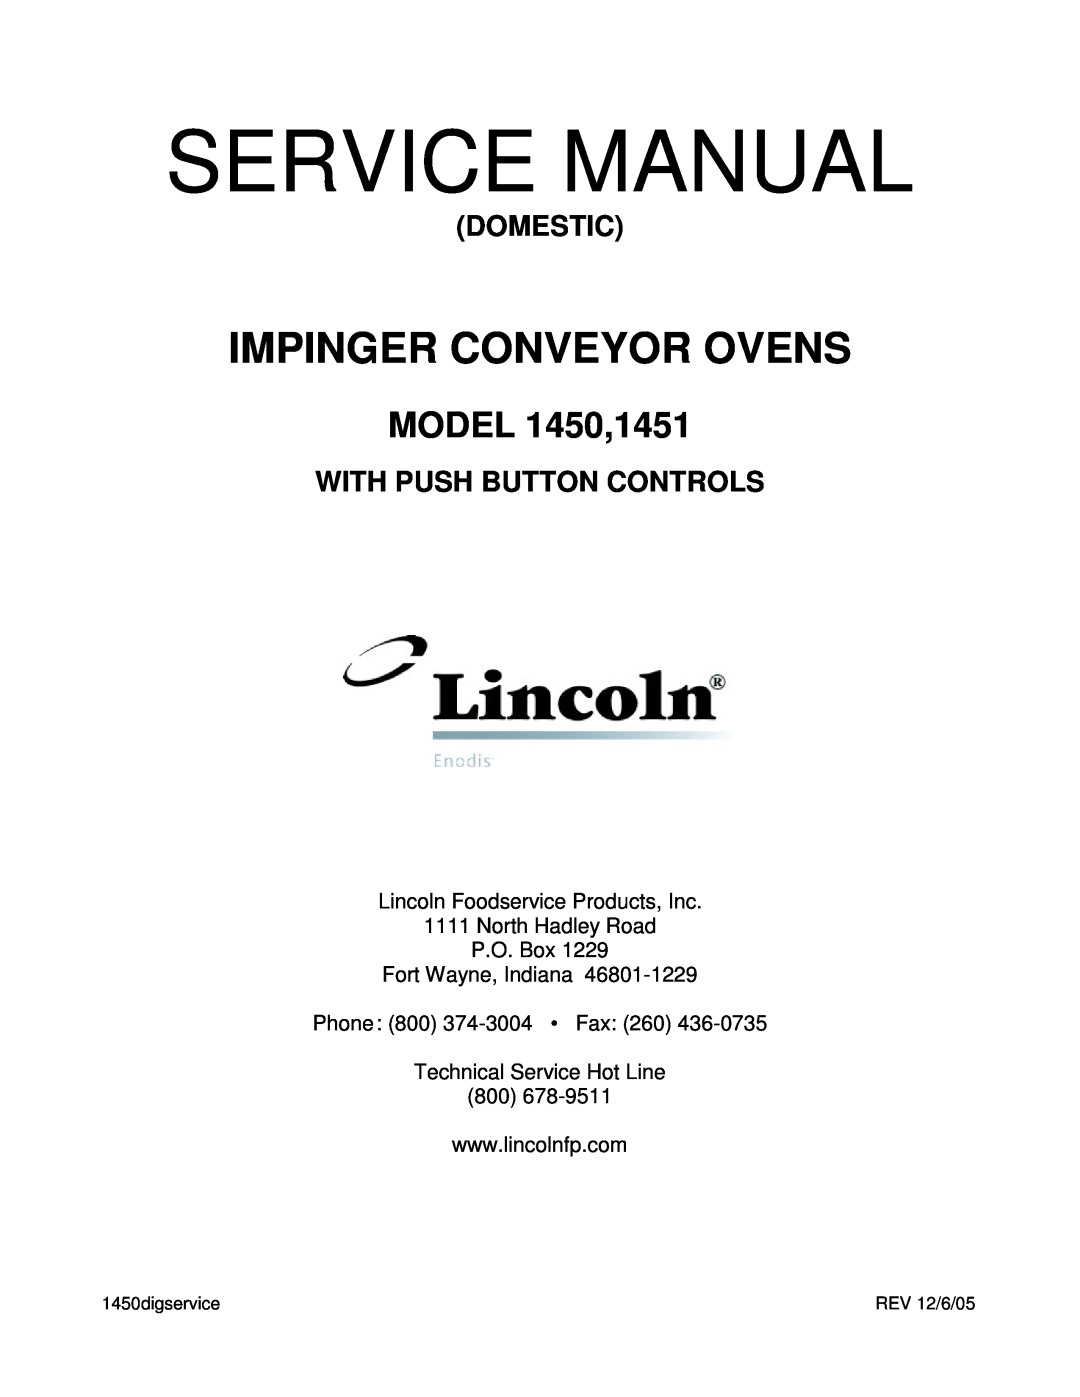 Cub Cadet 1451 service manual Lincoln Foodservice Products, Inc, North Hadley Road P.O. Box, Technical Service Hot Line 